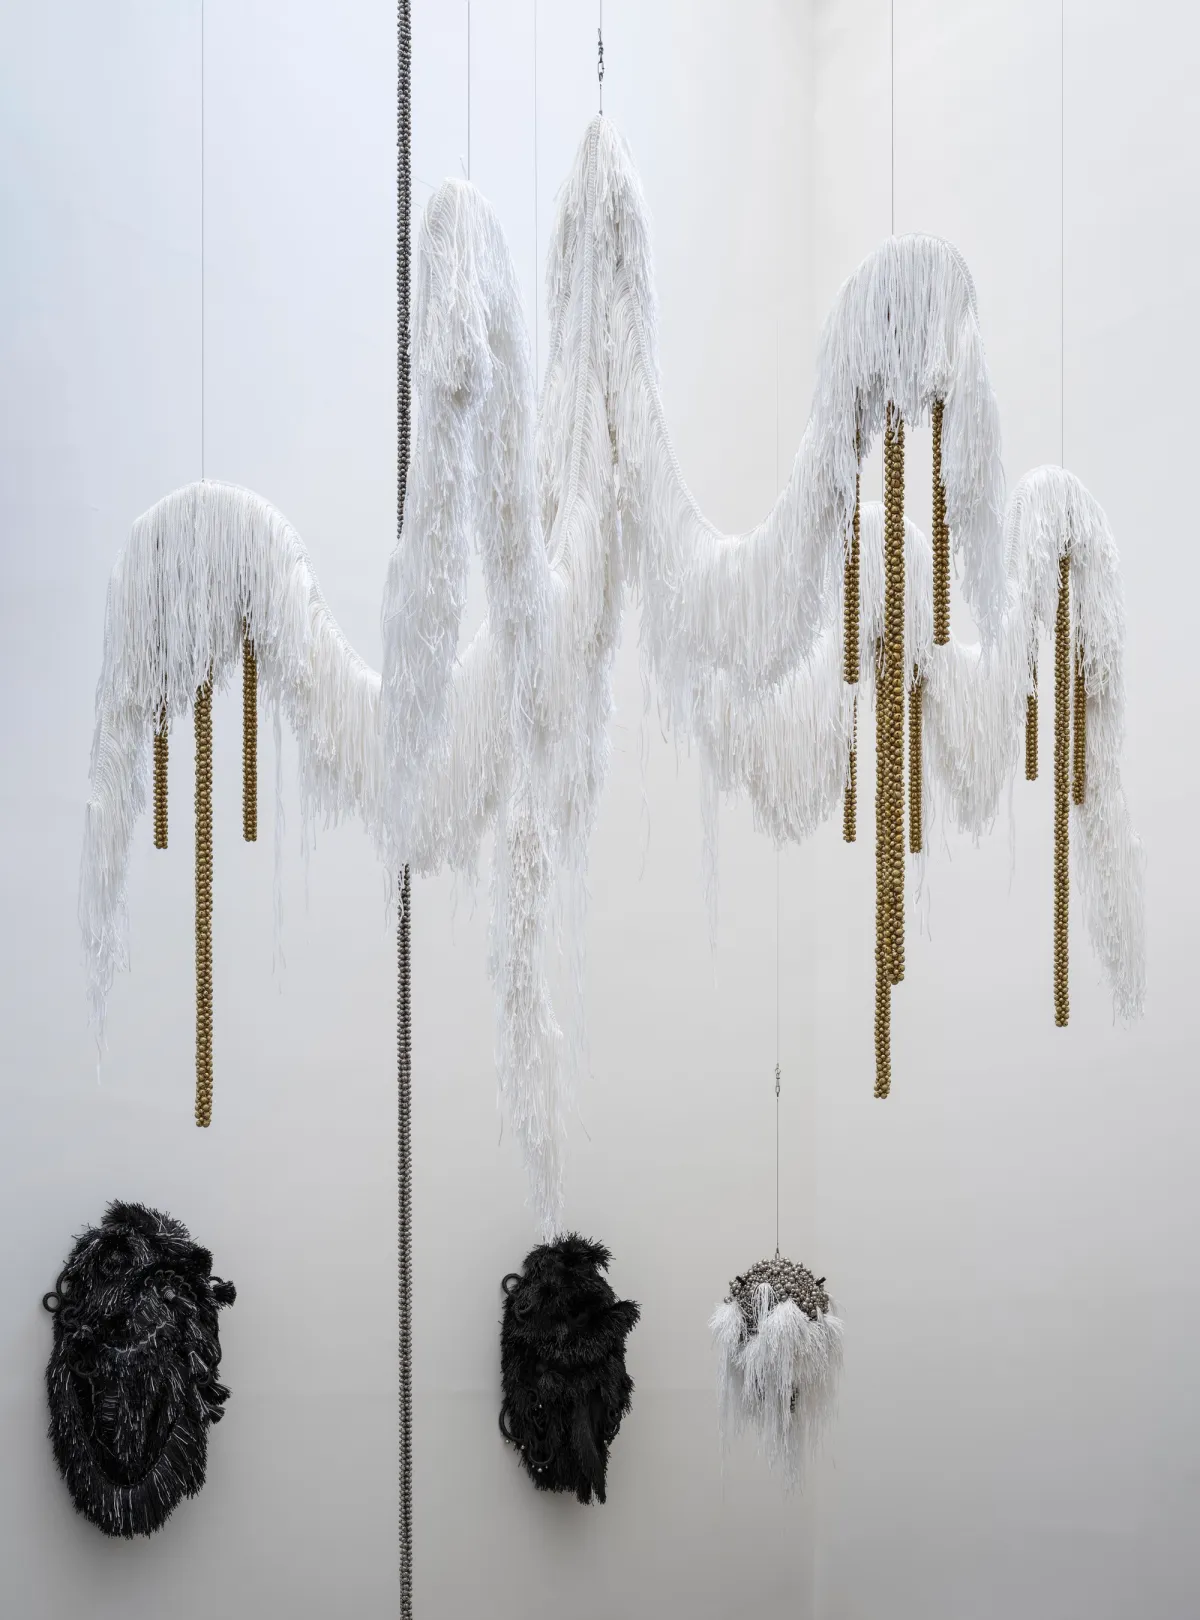 An art installation featuring a large, white, furry chandelier-like structure suspended from the ceiling. Adorning the walls are two dark, furry forms, with a smaller white, furry spherical object also hanging from above.